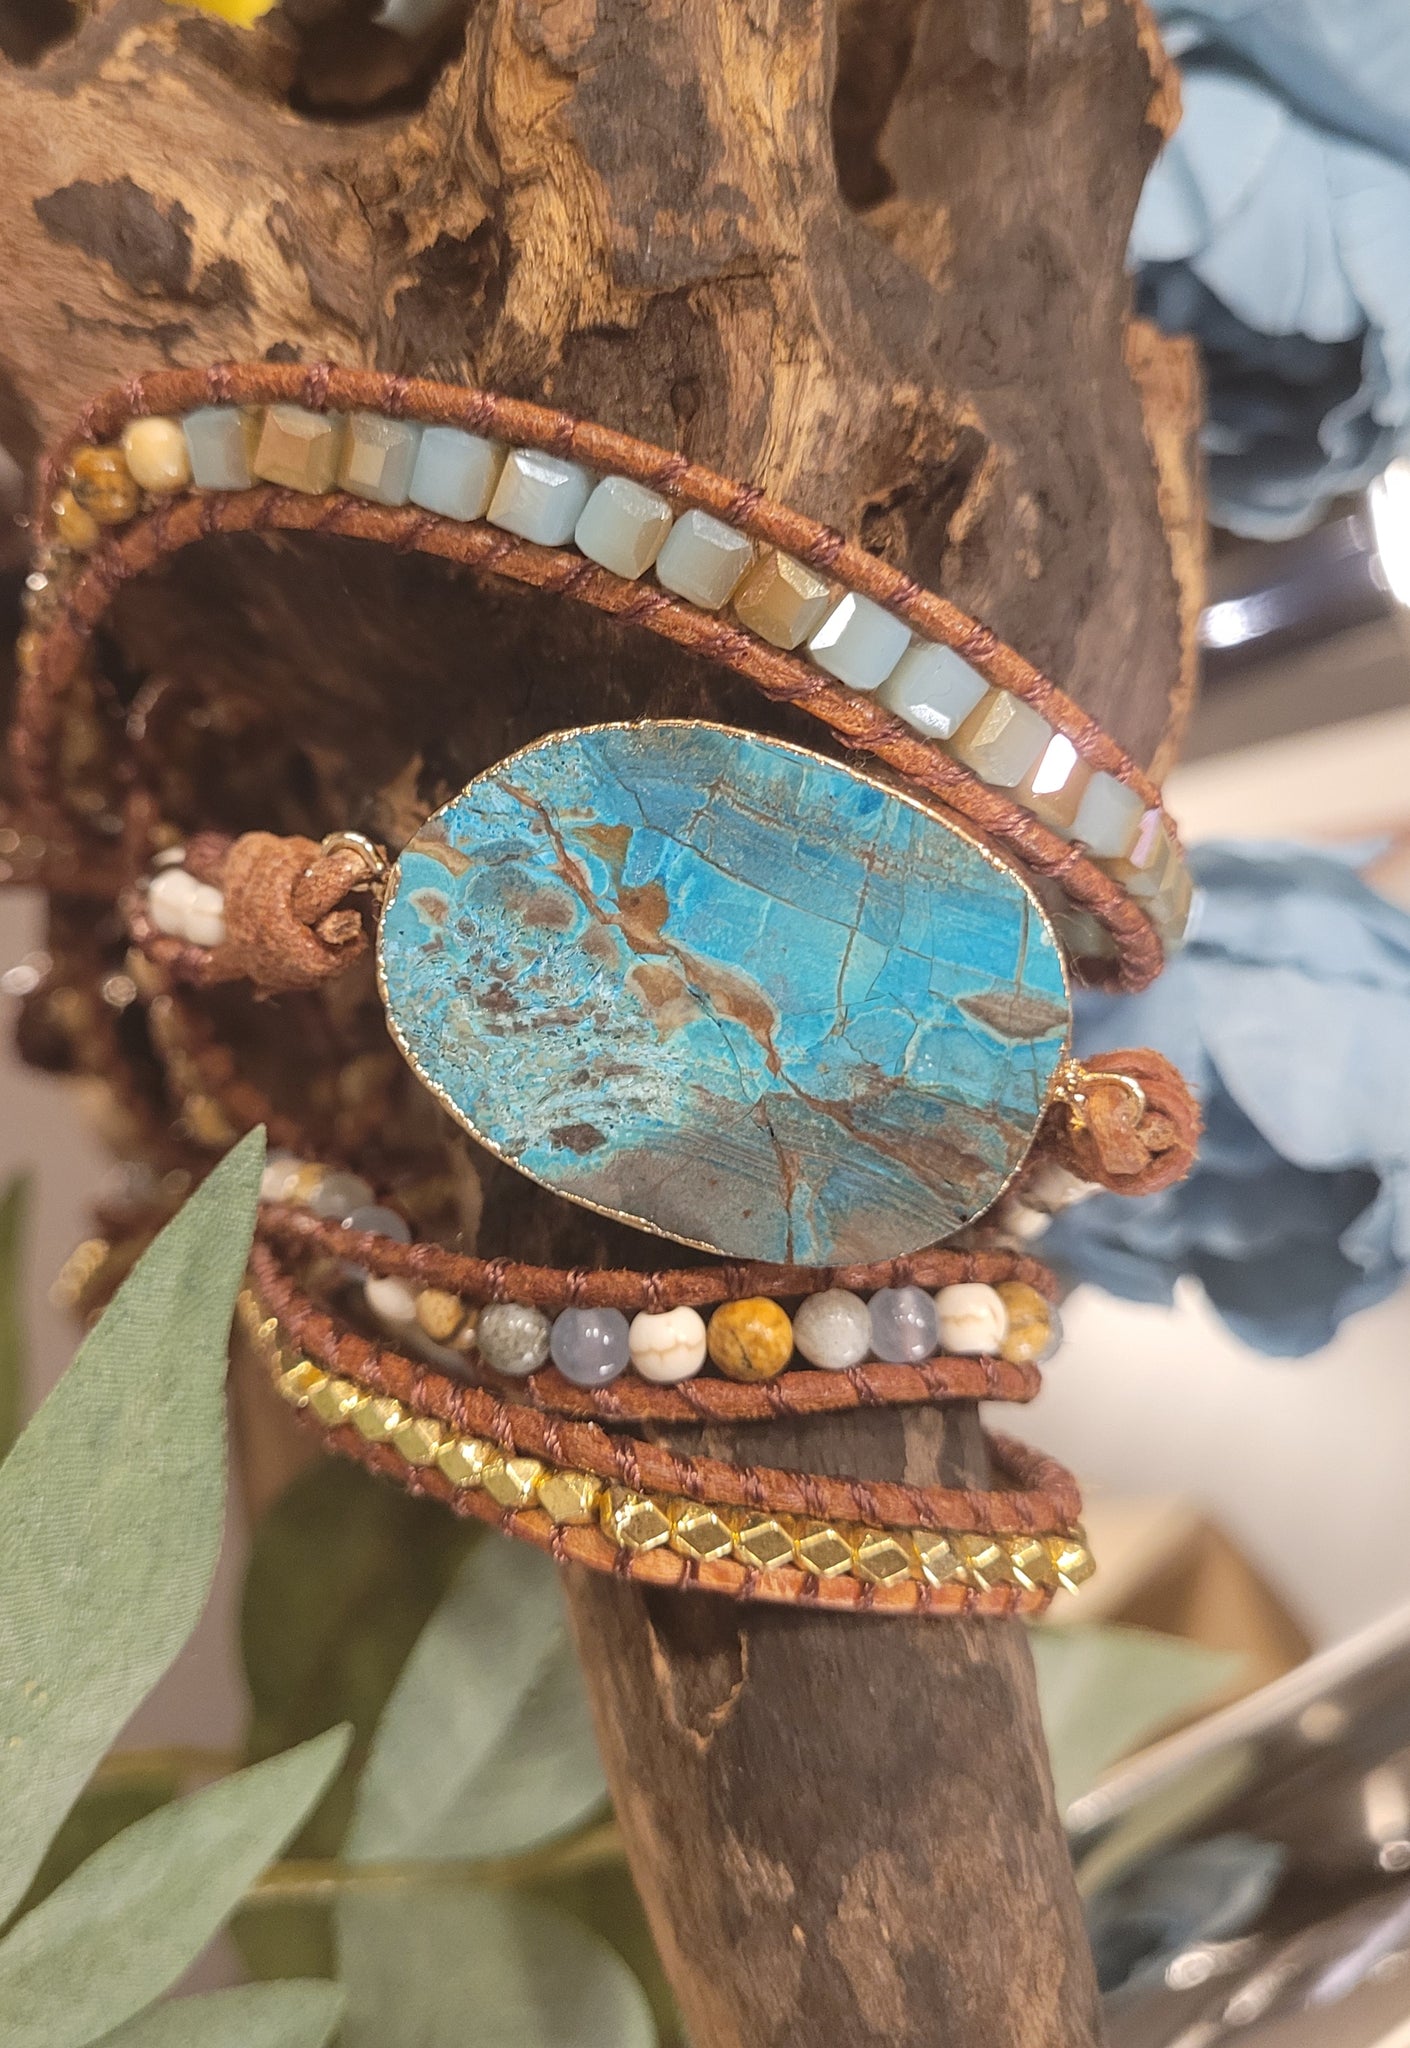 Unisex Turquoise & Mixed Color Natural Stone & Leather Cord Wrap Bracelet